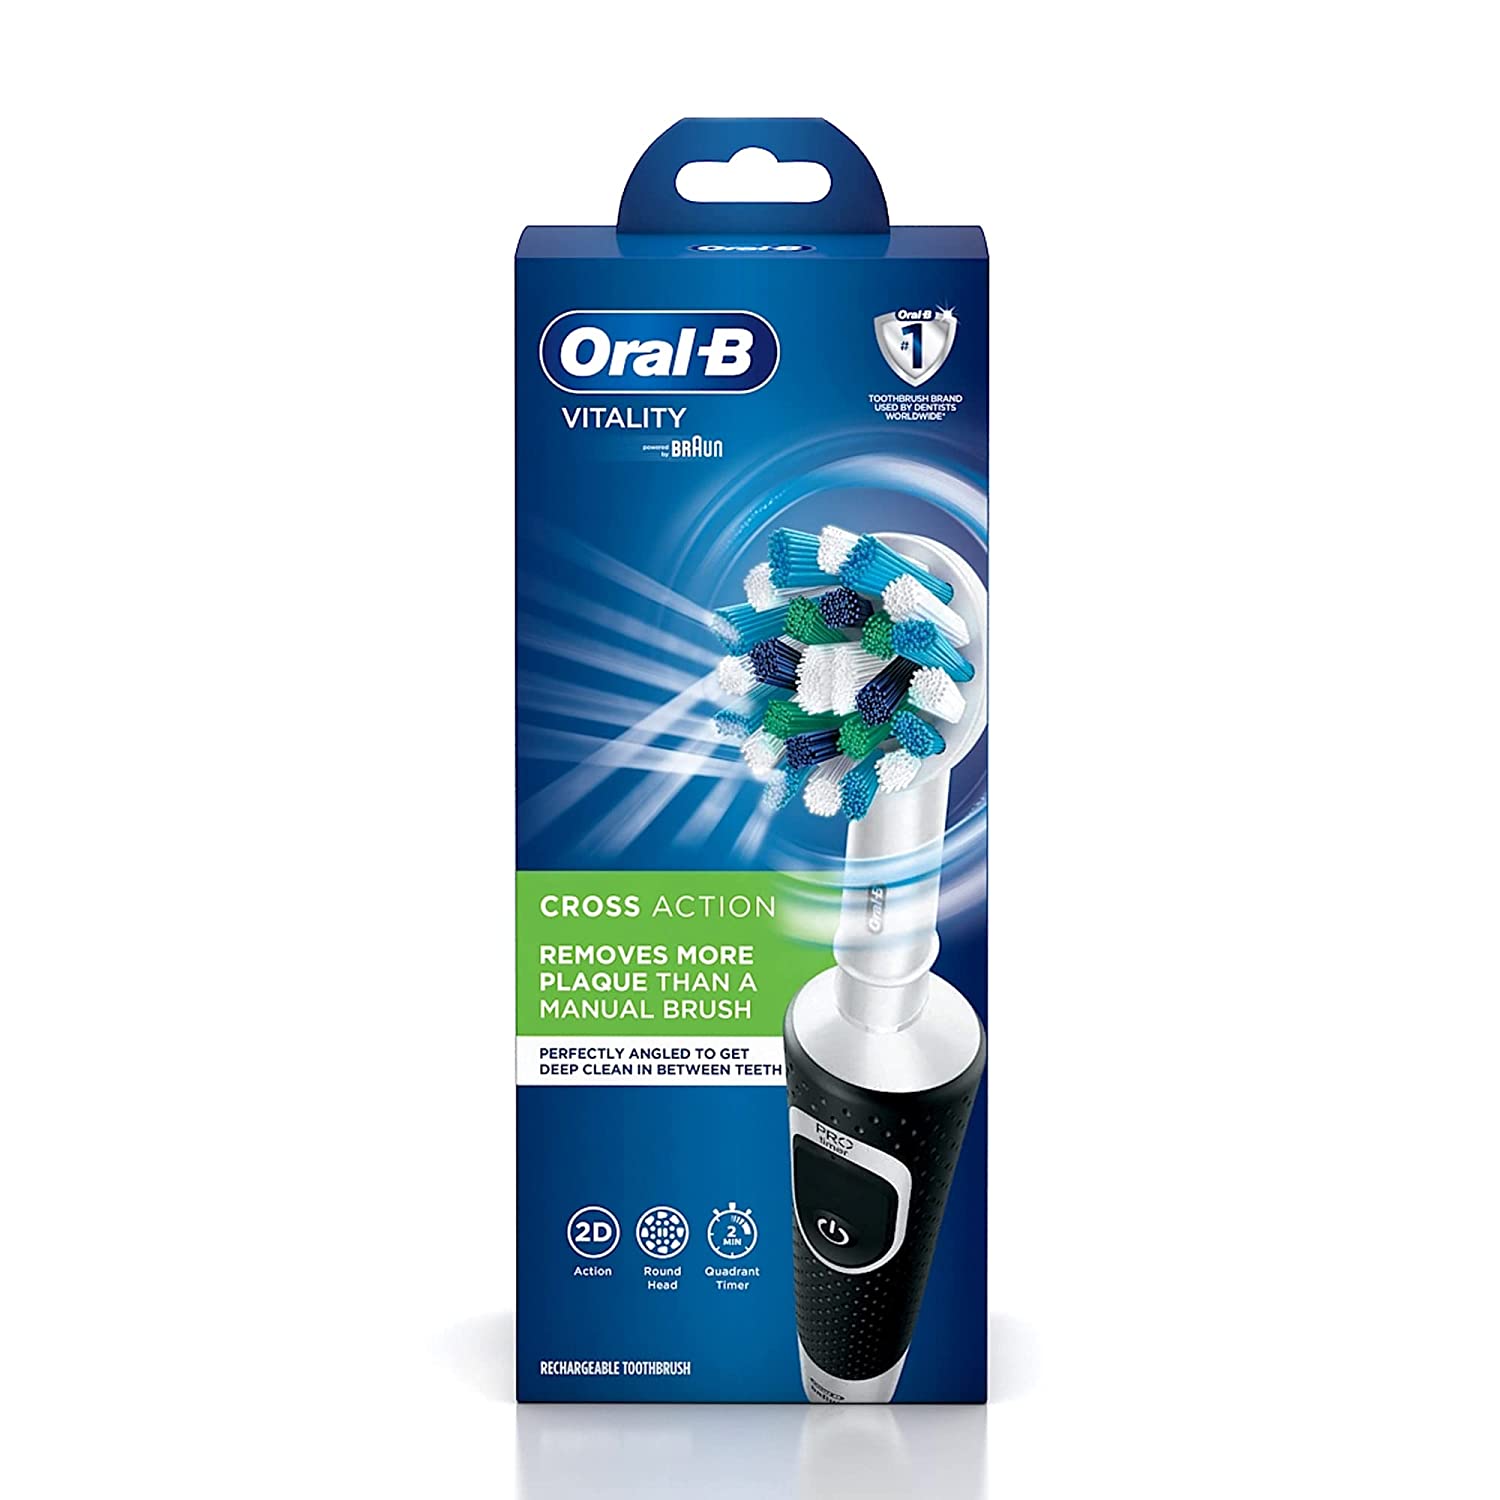 Oral-B Vitality 100 Black Criss Cross Electric Rechargeable Toothbrush_Powered By Braun